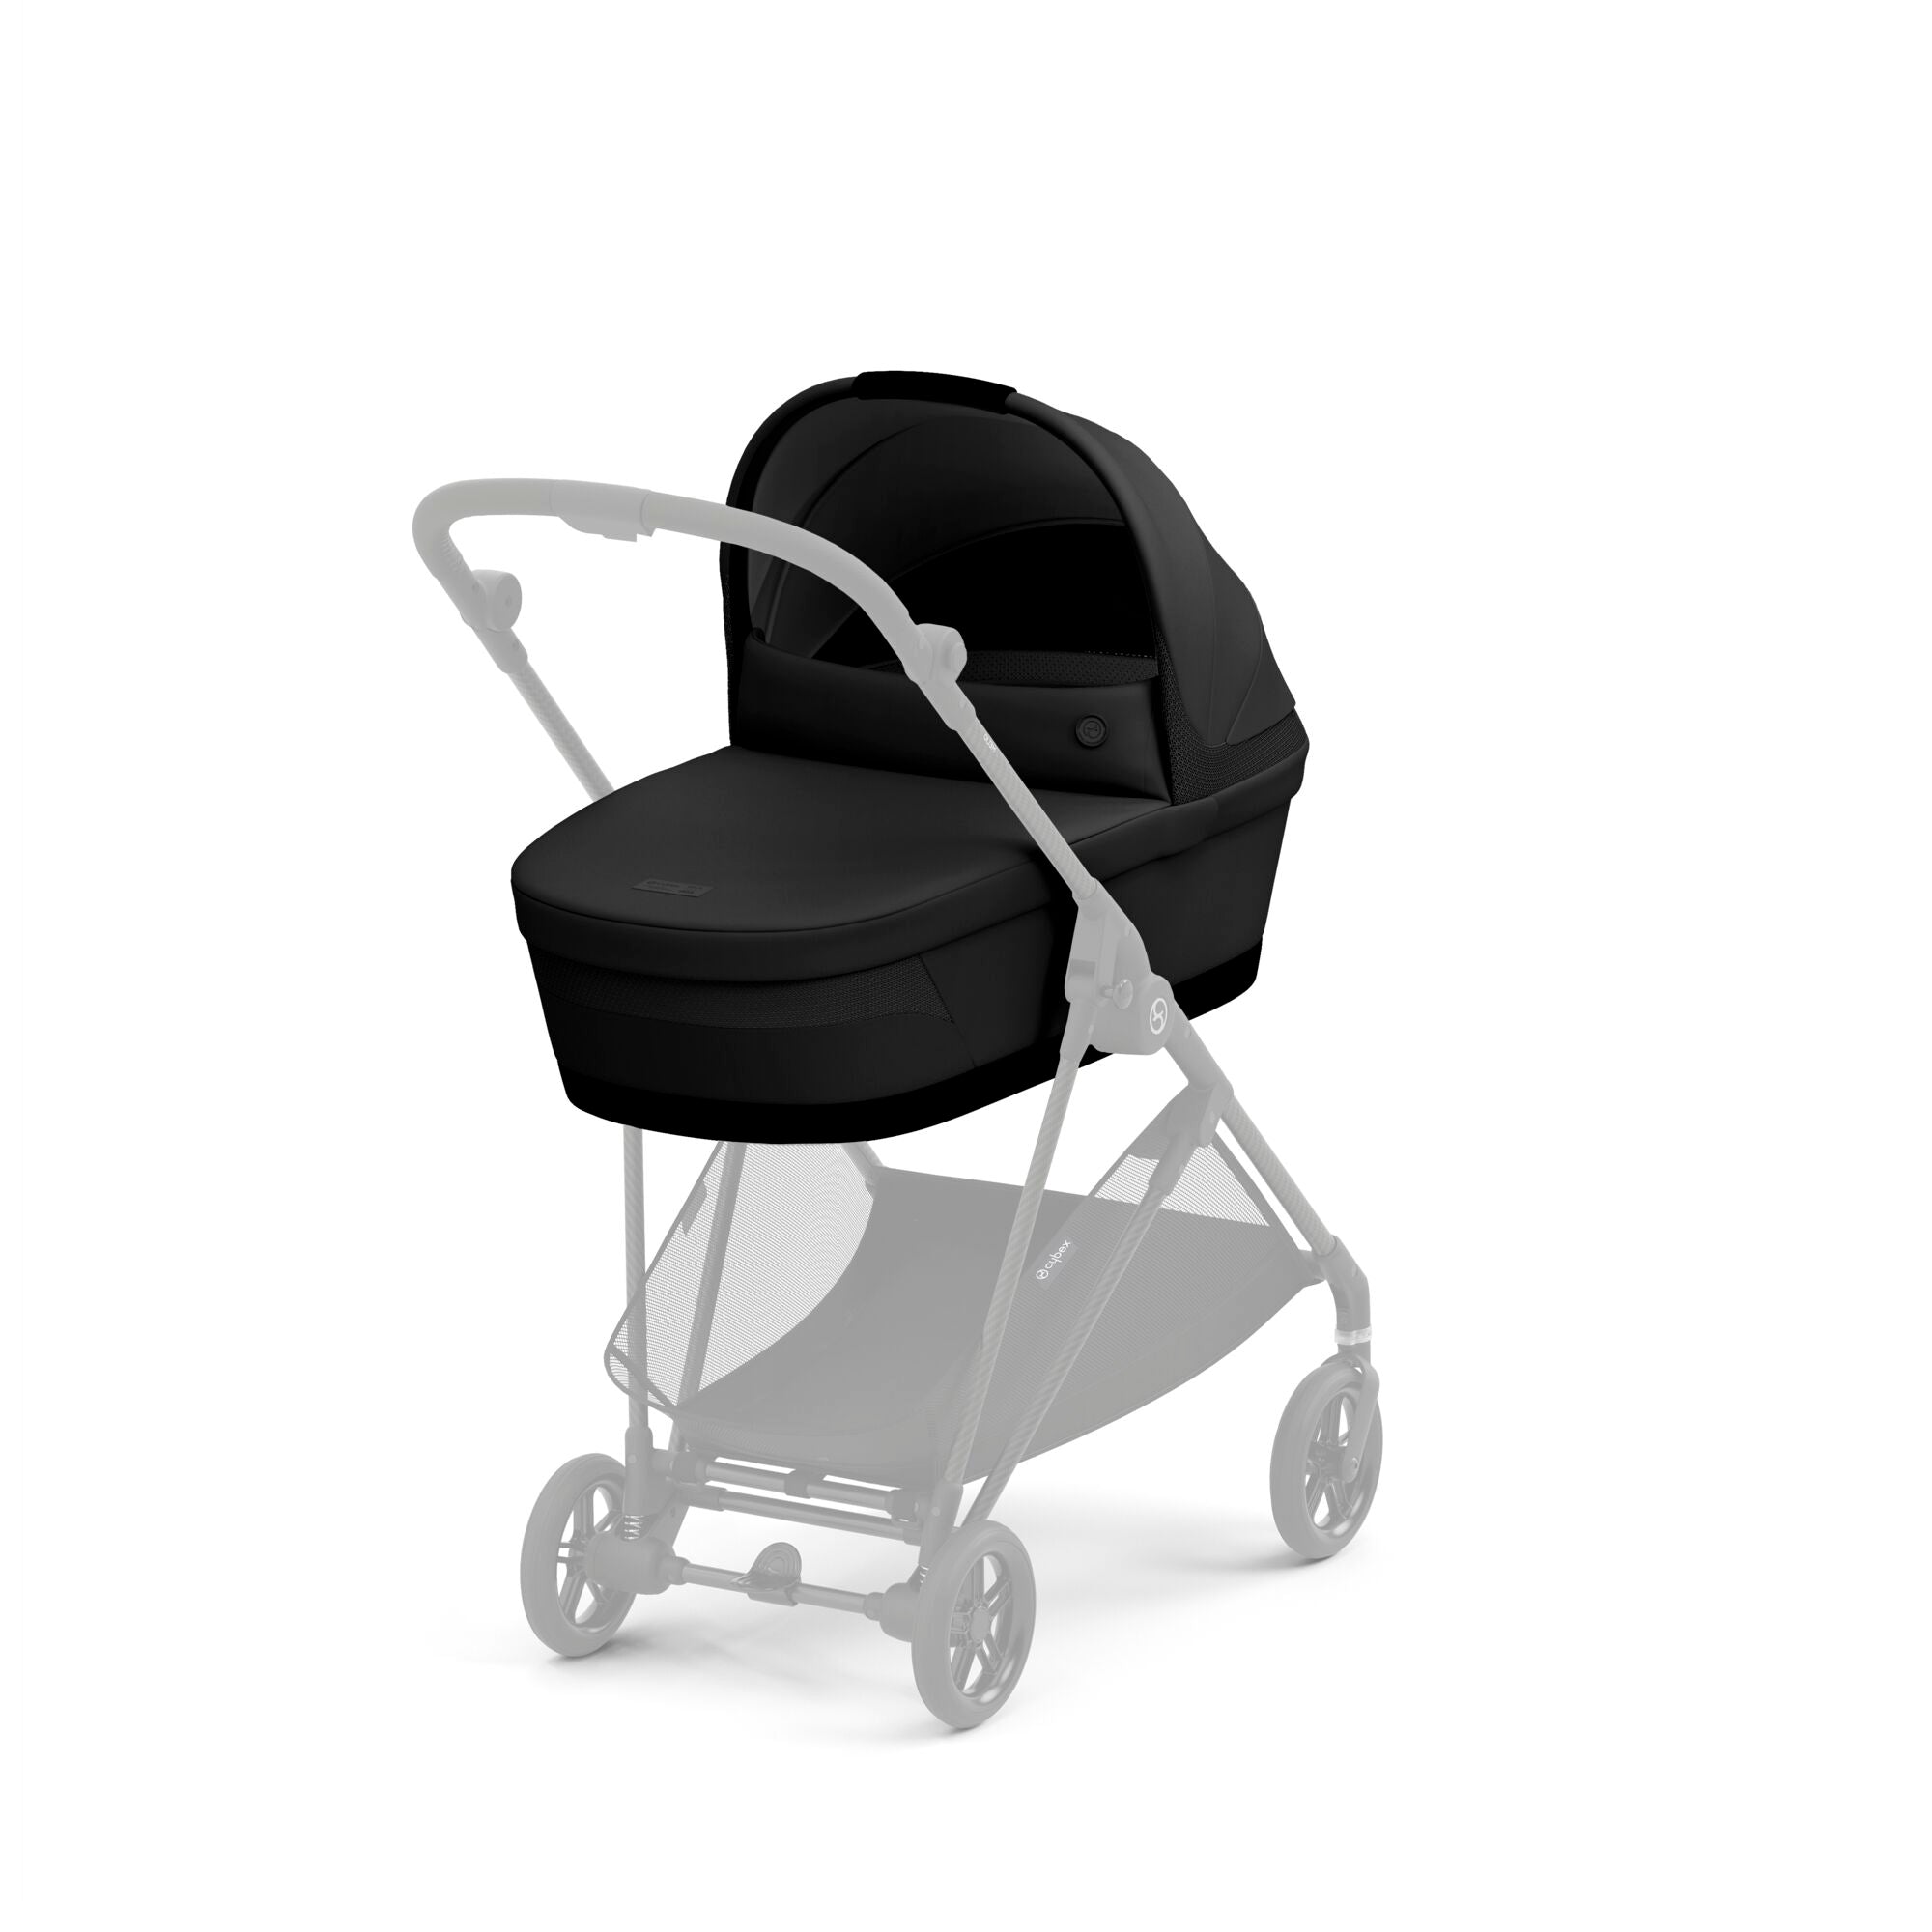 Cybex Melio Cot 3, Moon Black -- Available March - ANB Baby -4063846369430$100 - $300